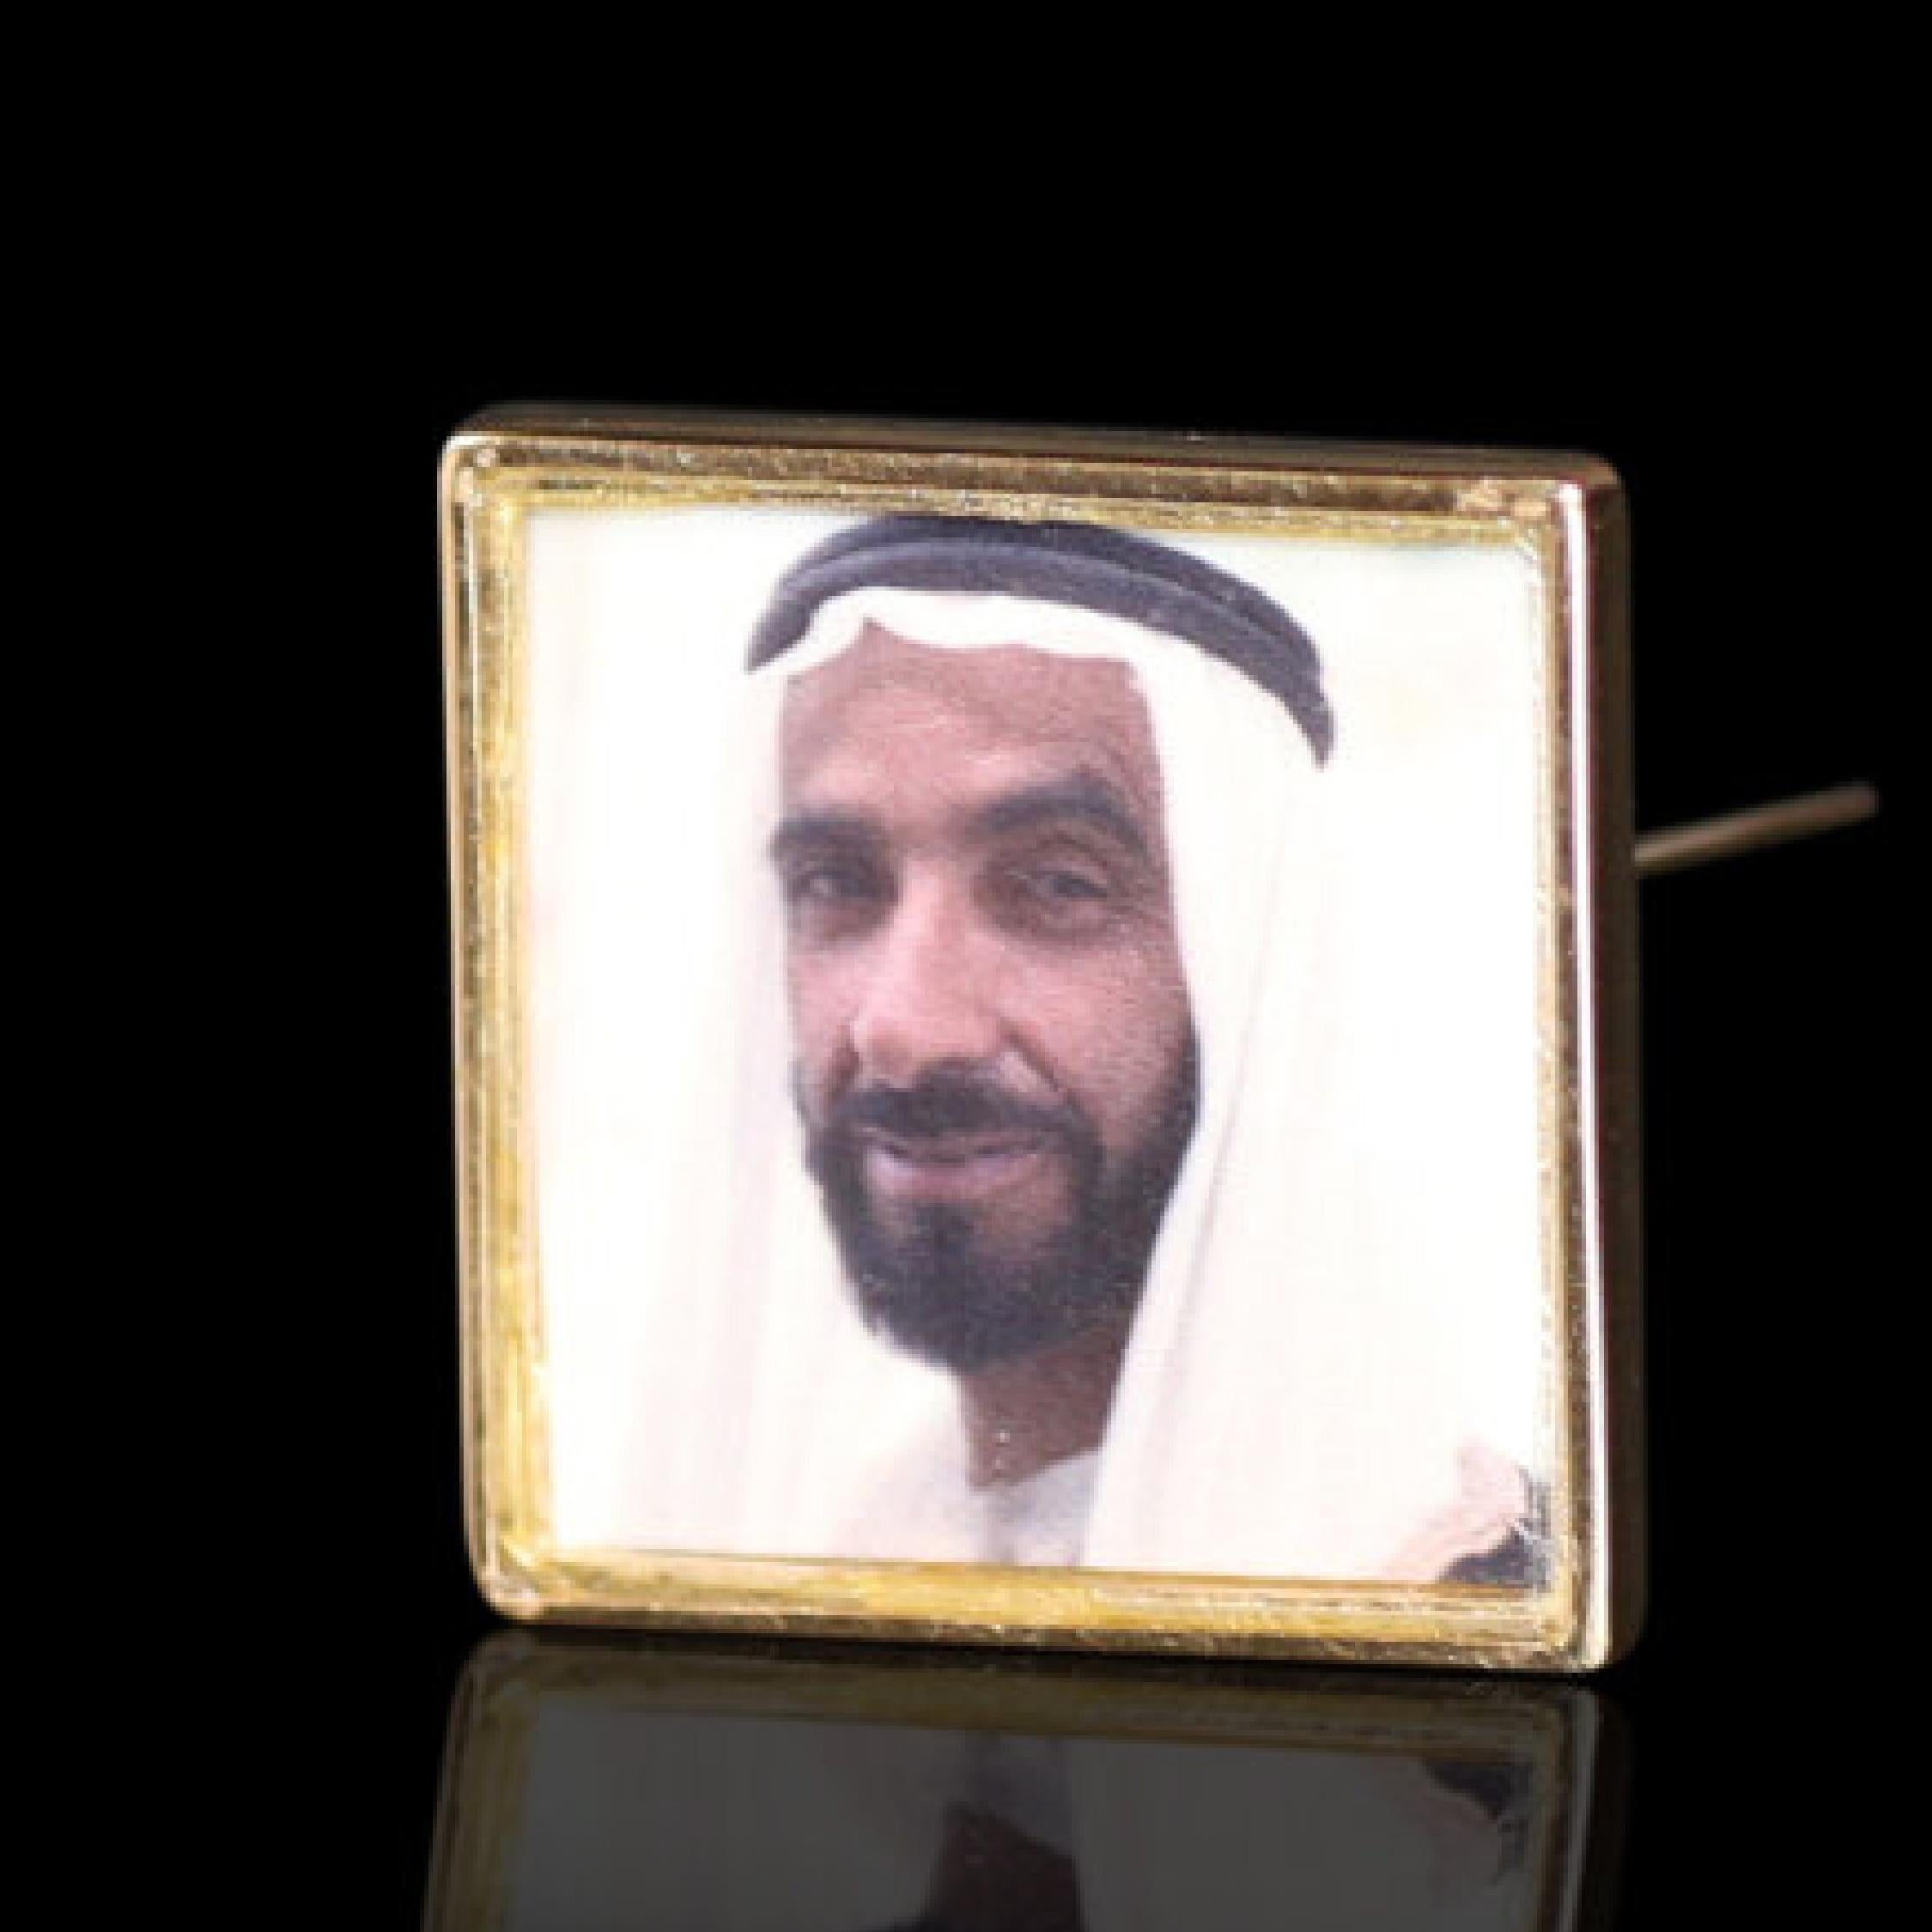 This brooch/pendant embodies the extraordinary legacy of Baba Zayed, the visionary founding father of the United Arab Emirates. Revered for his unwavering commitment to unity and progress, Sheikh Zayed left an indelible mark on the nation and in the